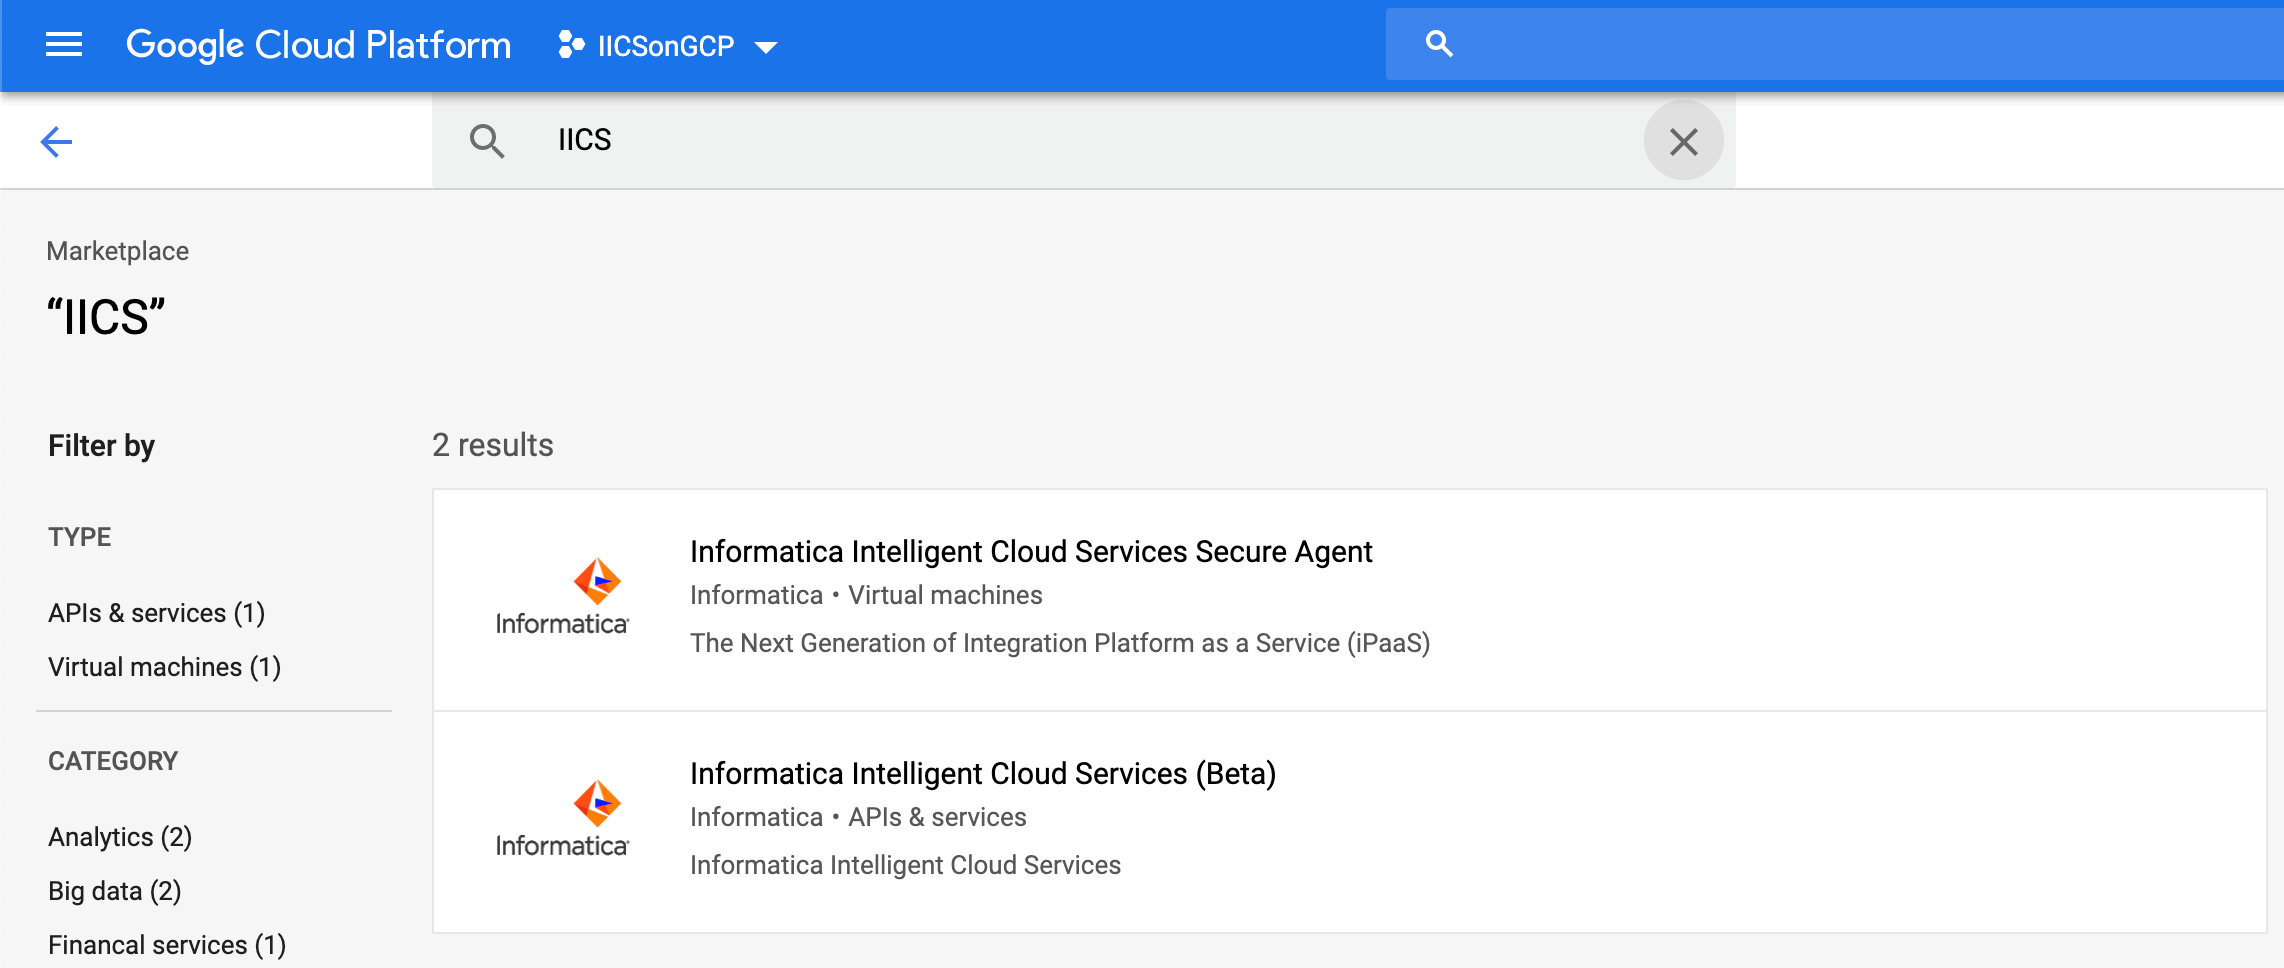 In this image, "IICS" is entered in the search bar at the top. The page shows two search results: "Informatica Intelligent Cloud Services Secure Agent" and "Informatica Intelligent Cloud Services (Beta)." 
				  